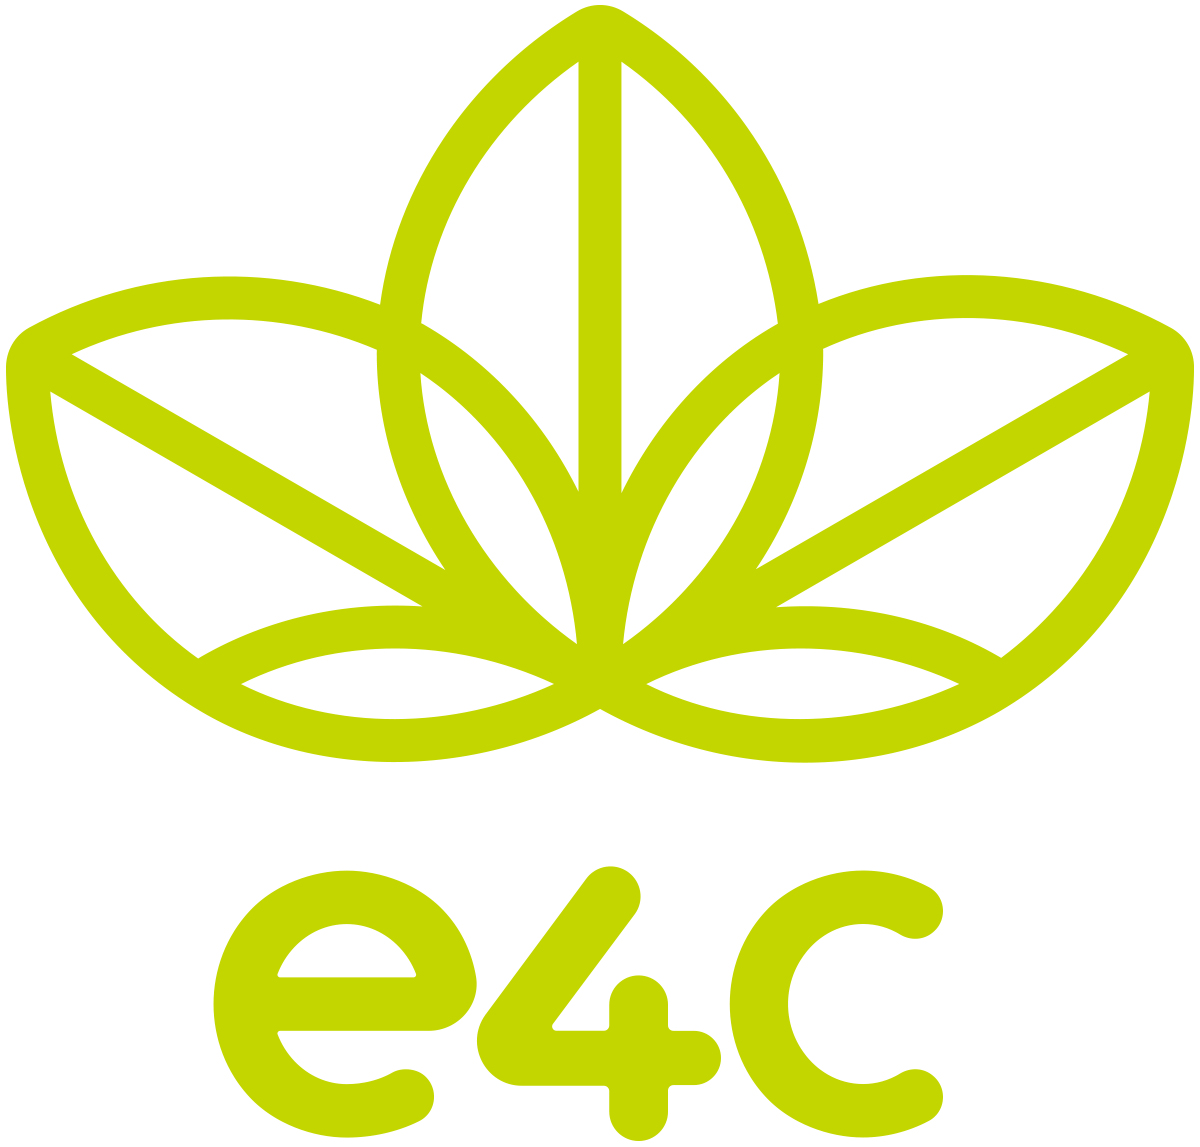 At e4c diversity is our strength. We embrace diversity and offer equal opportunities to all qualified applicants. We welcome your application regardless of origin, culture, ethnicity, age, ability, gender identity, sexual orientation or faith.